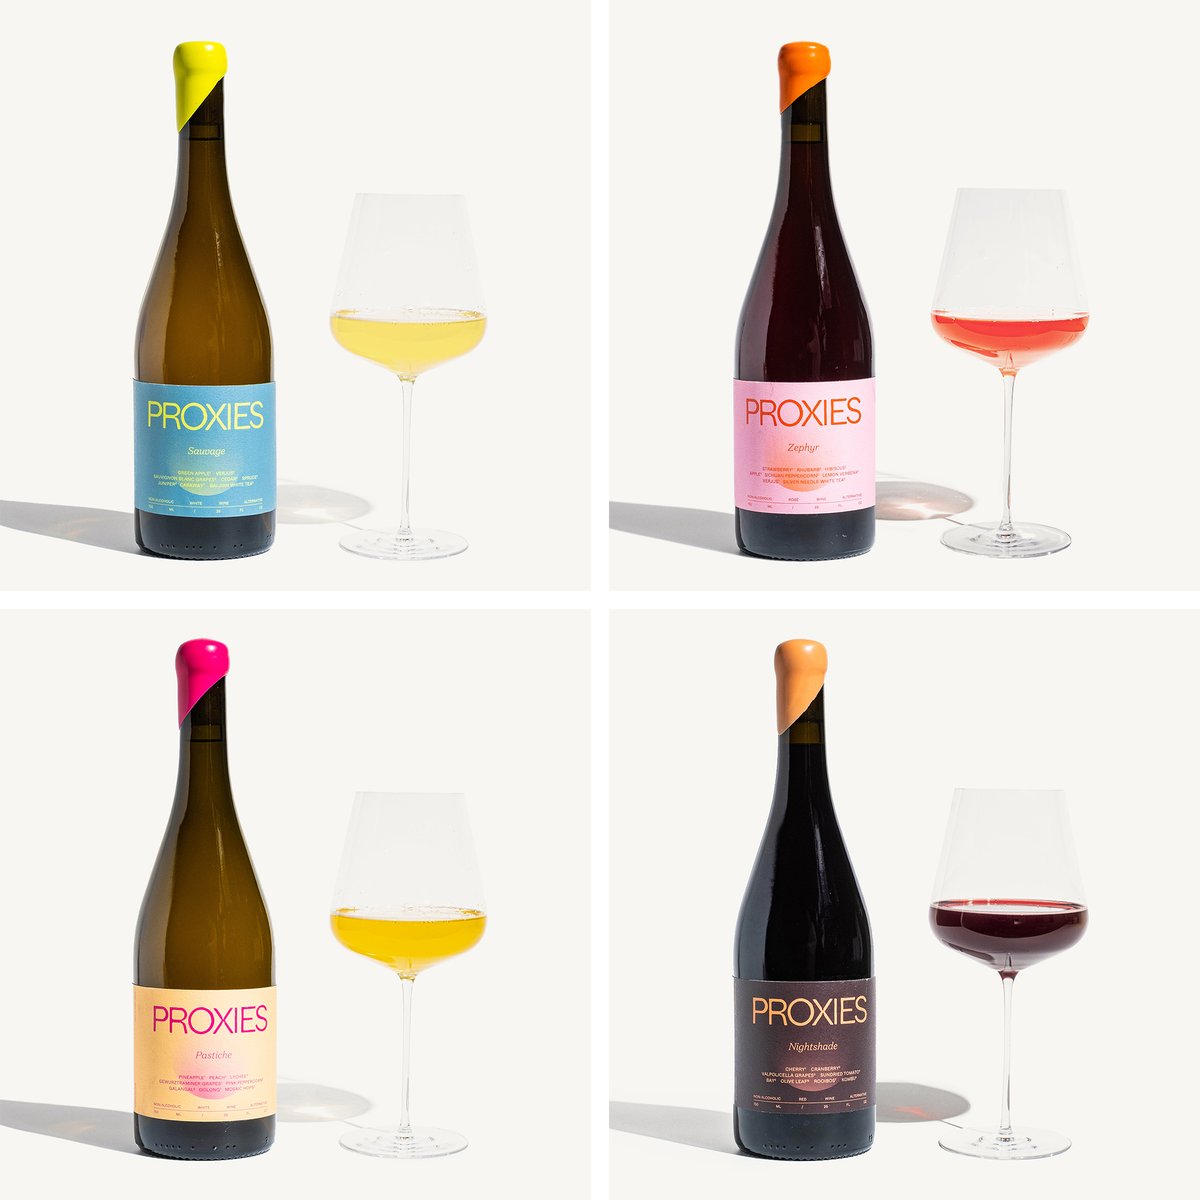 Gifts for people who love wine but are trying non-alcoholic